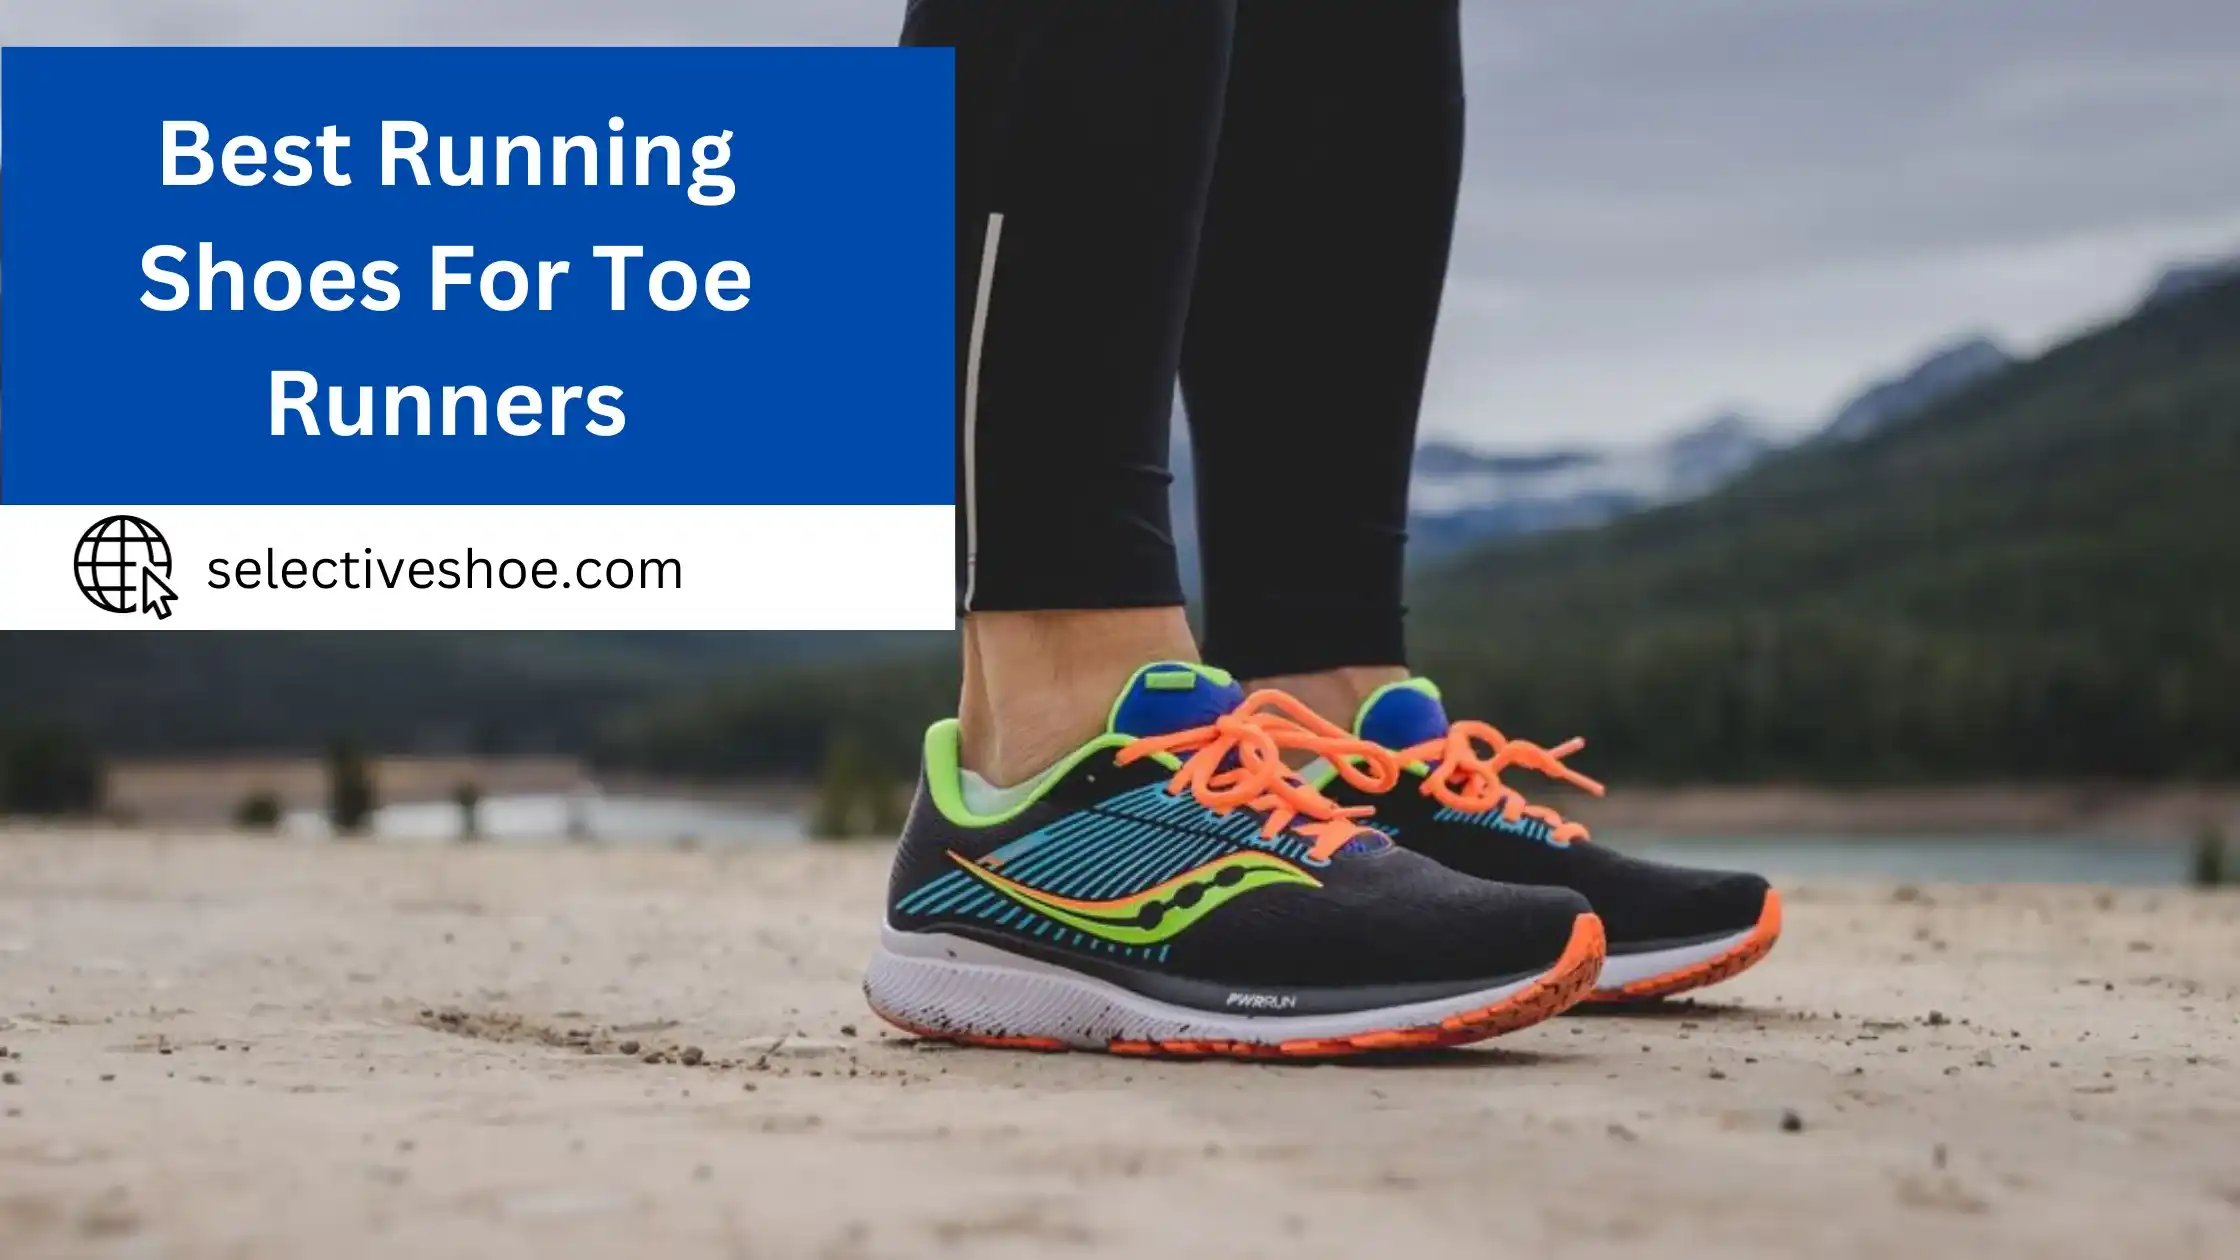 Best Running Shoes For Toe Runners - A Comprehensive Guide